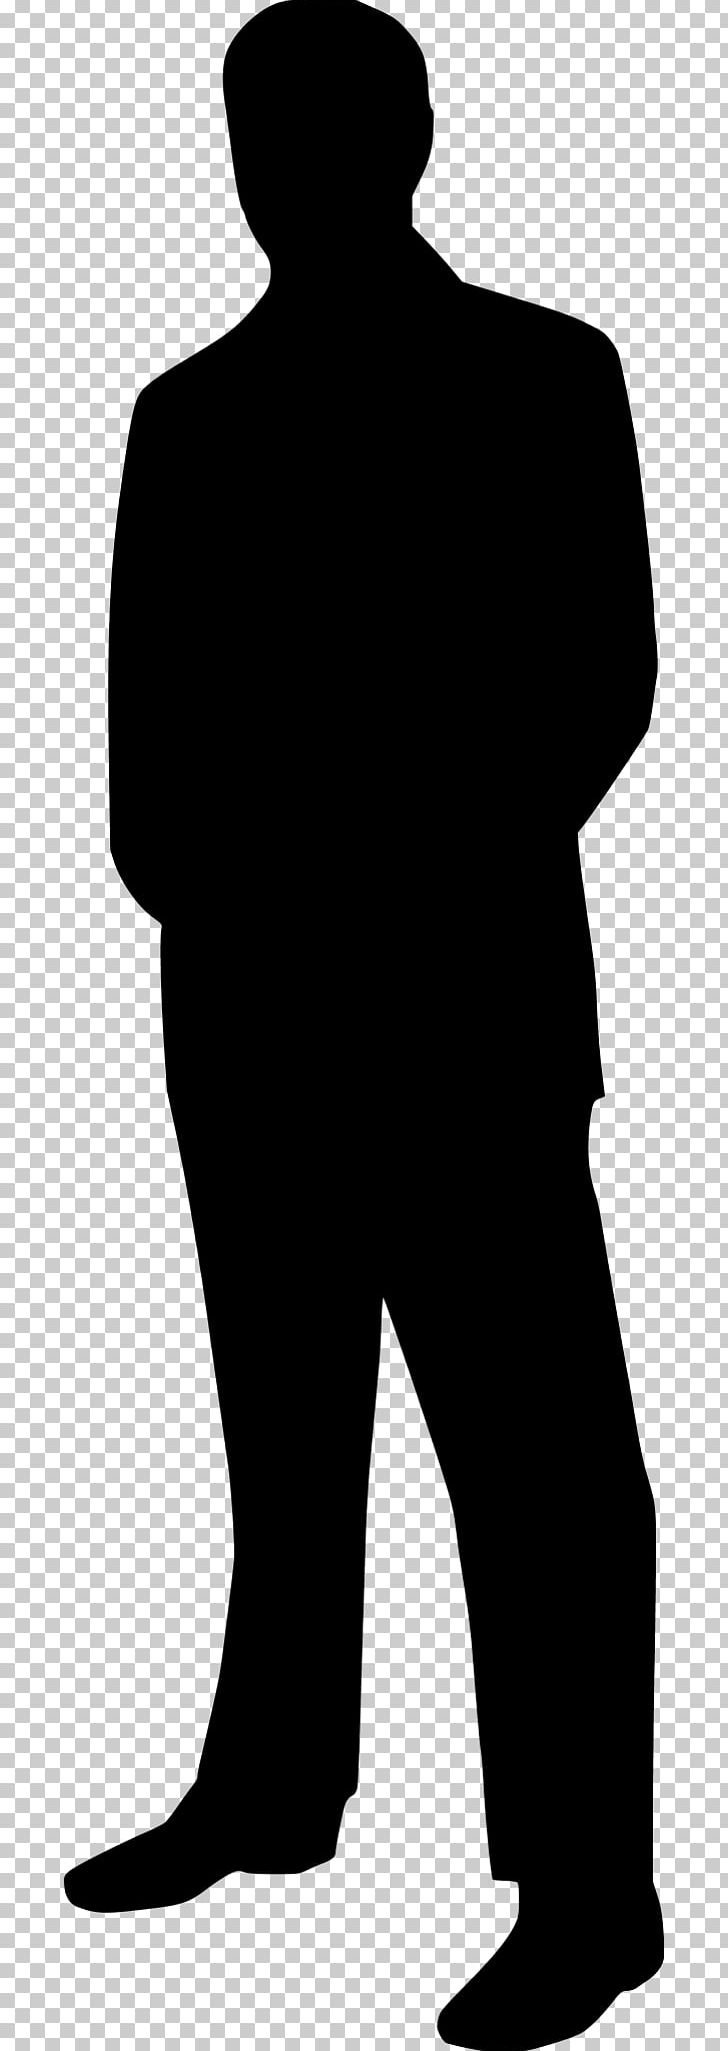 Silhouette Man PNG, Clipart, Animals, Black, Black And White, Businessperson, Clip Art Free PNG Download